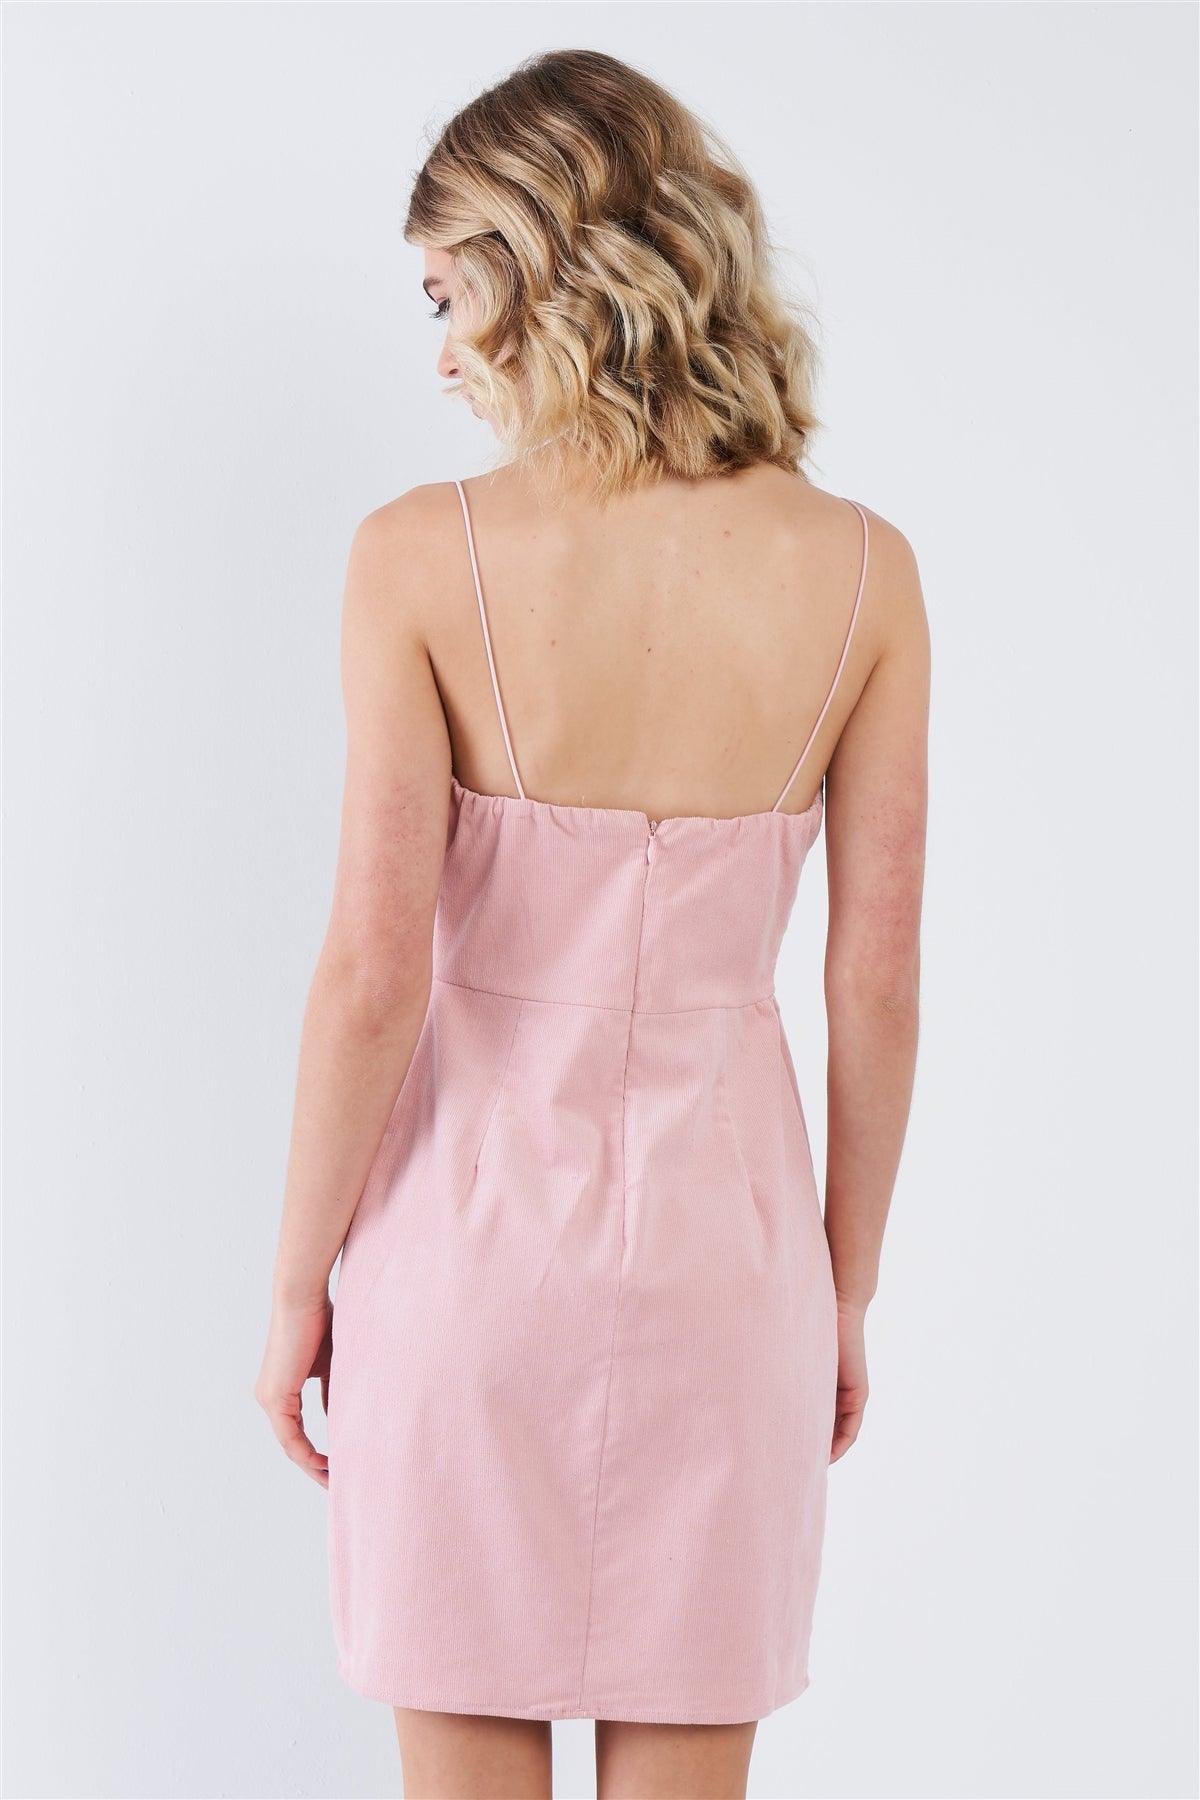 Dusty Rose Pink Ribbed Suede Square Neck Mini Dress  /3-2-1